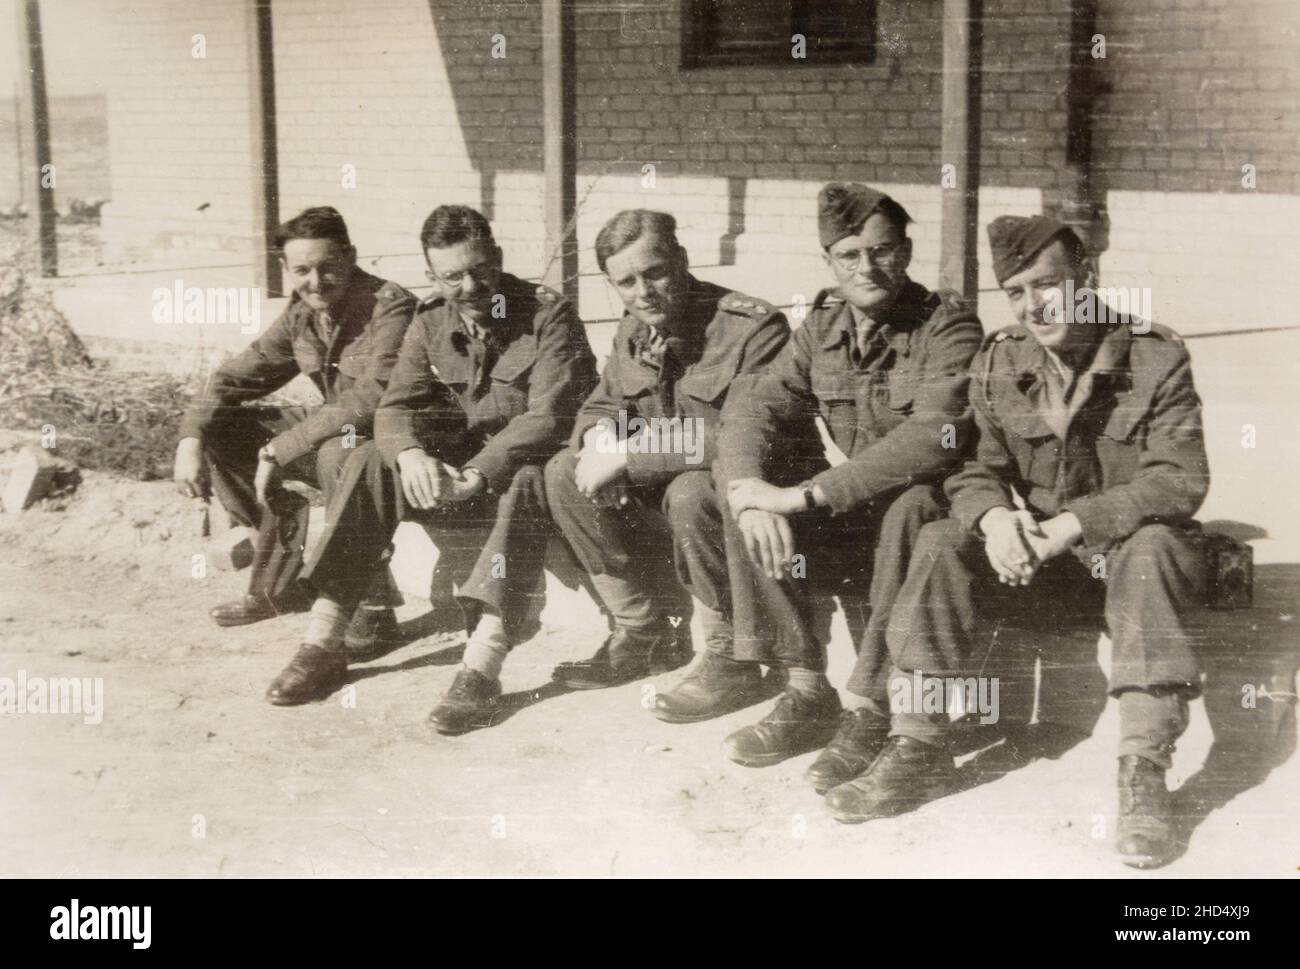 Middle East, Iraq, Kirkuk 1941-42. British Army officers of The 10th Indian Infantry Division relax at K2 oil station. Anglo-Iraqi war period. Stock Photo